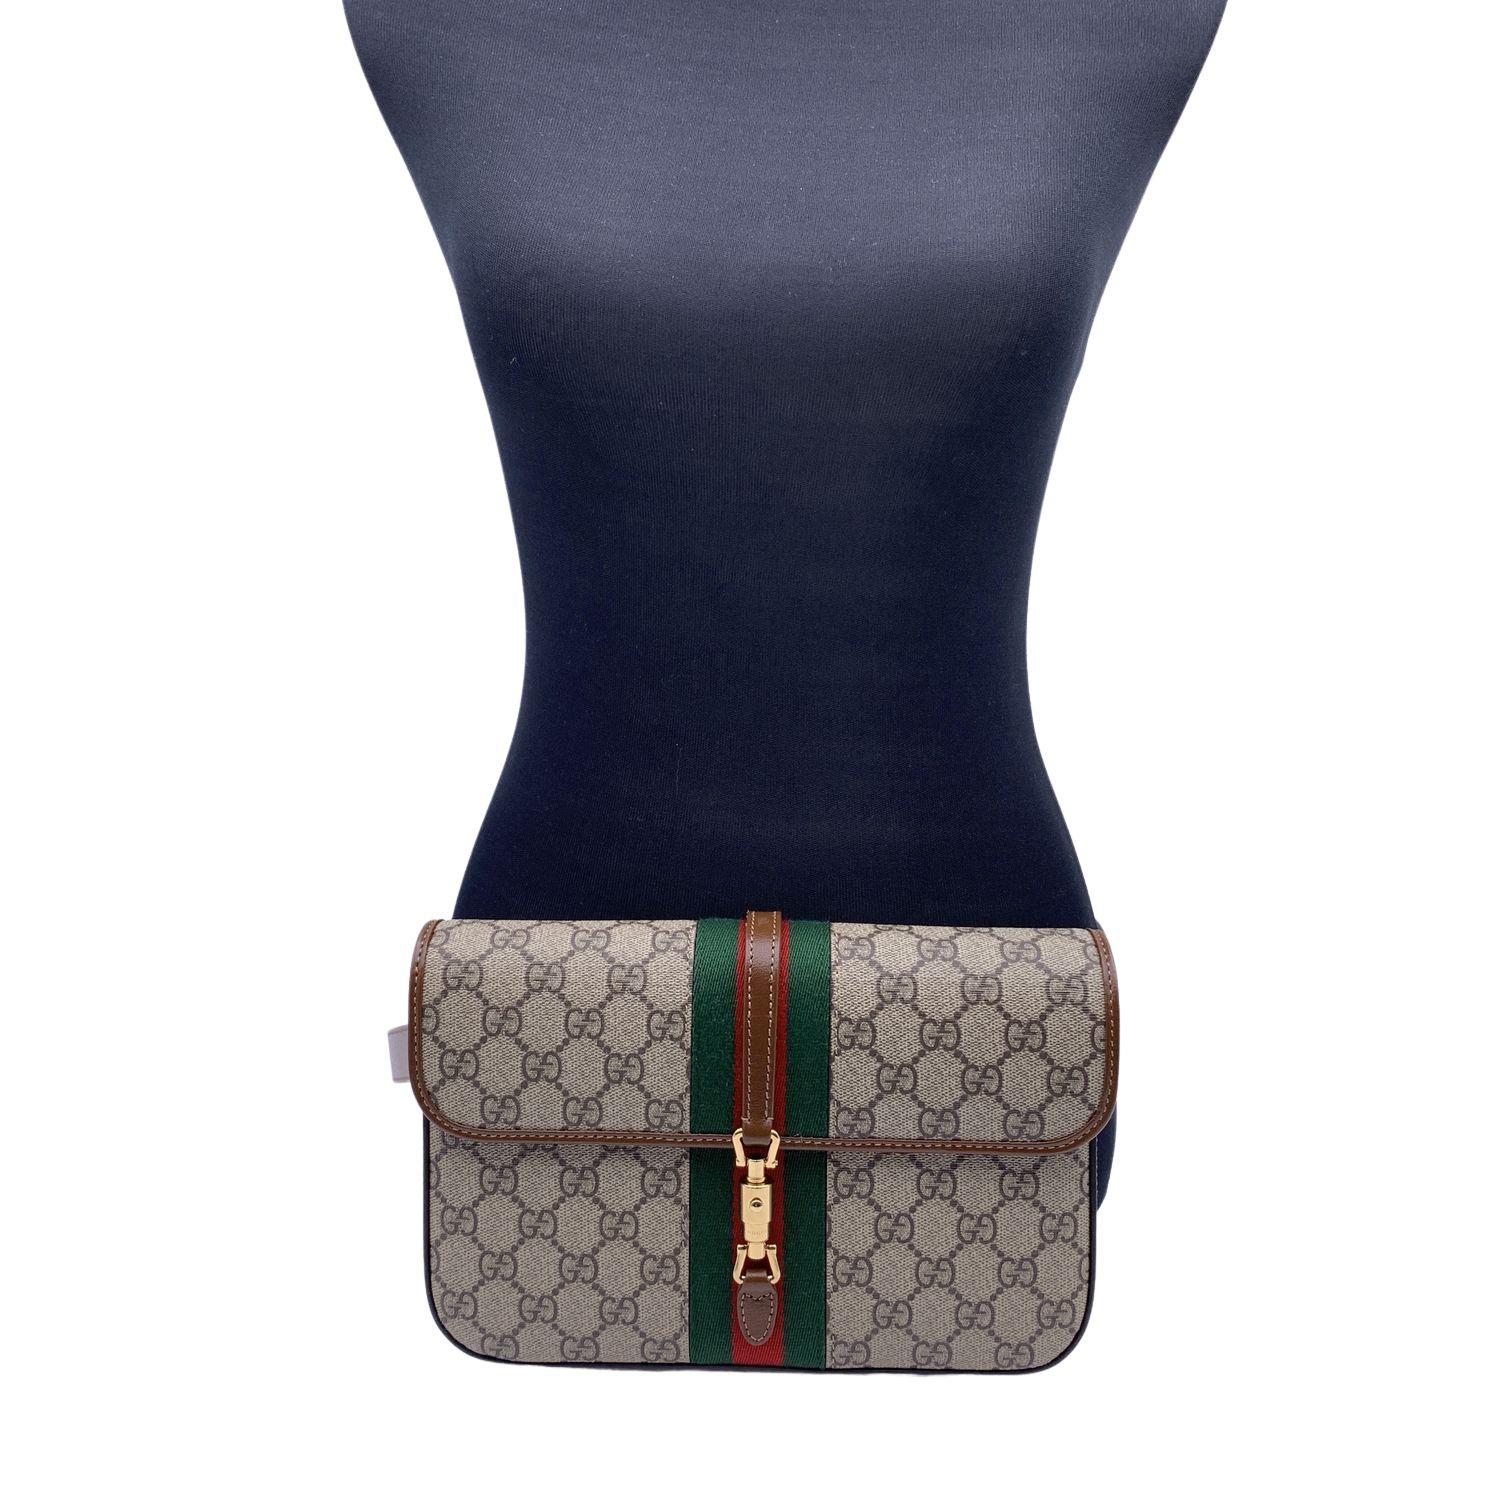 Beige and brown 'Jackie 1961' belt bag from Gucci. Crafted of GG Supreme canvas with brown leather trims. This model is very versatile; it can be used as a belt bag or as a clutch purse if you remove the strap. Logo-engraved snap button, green and